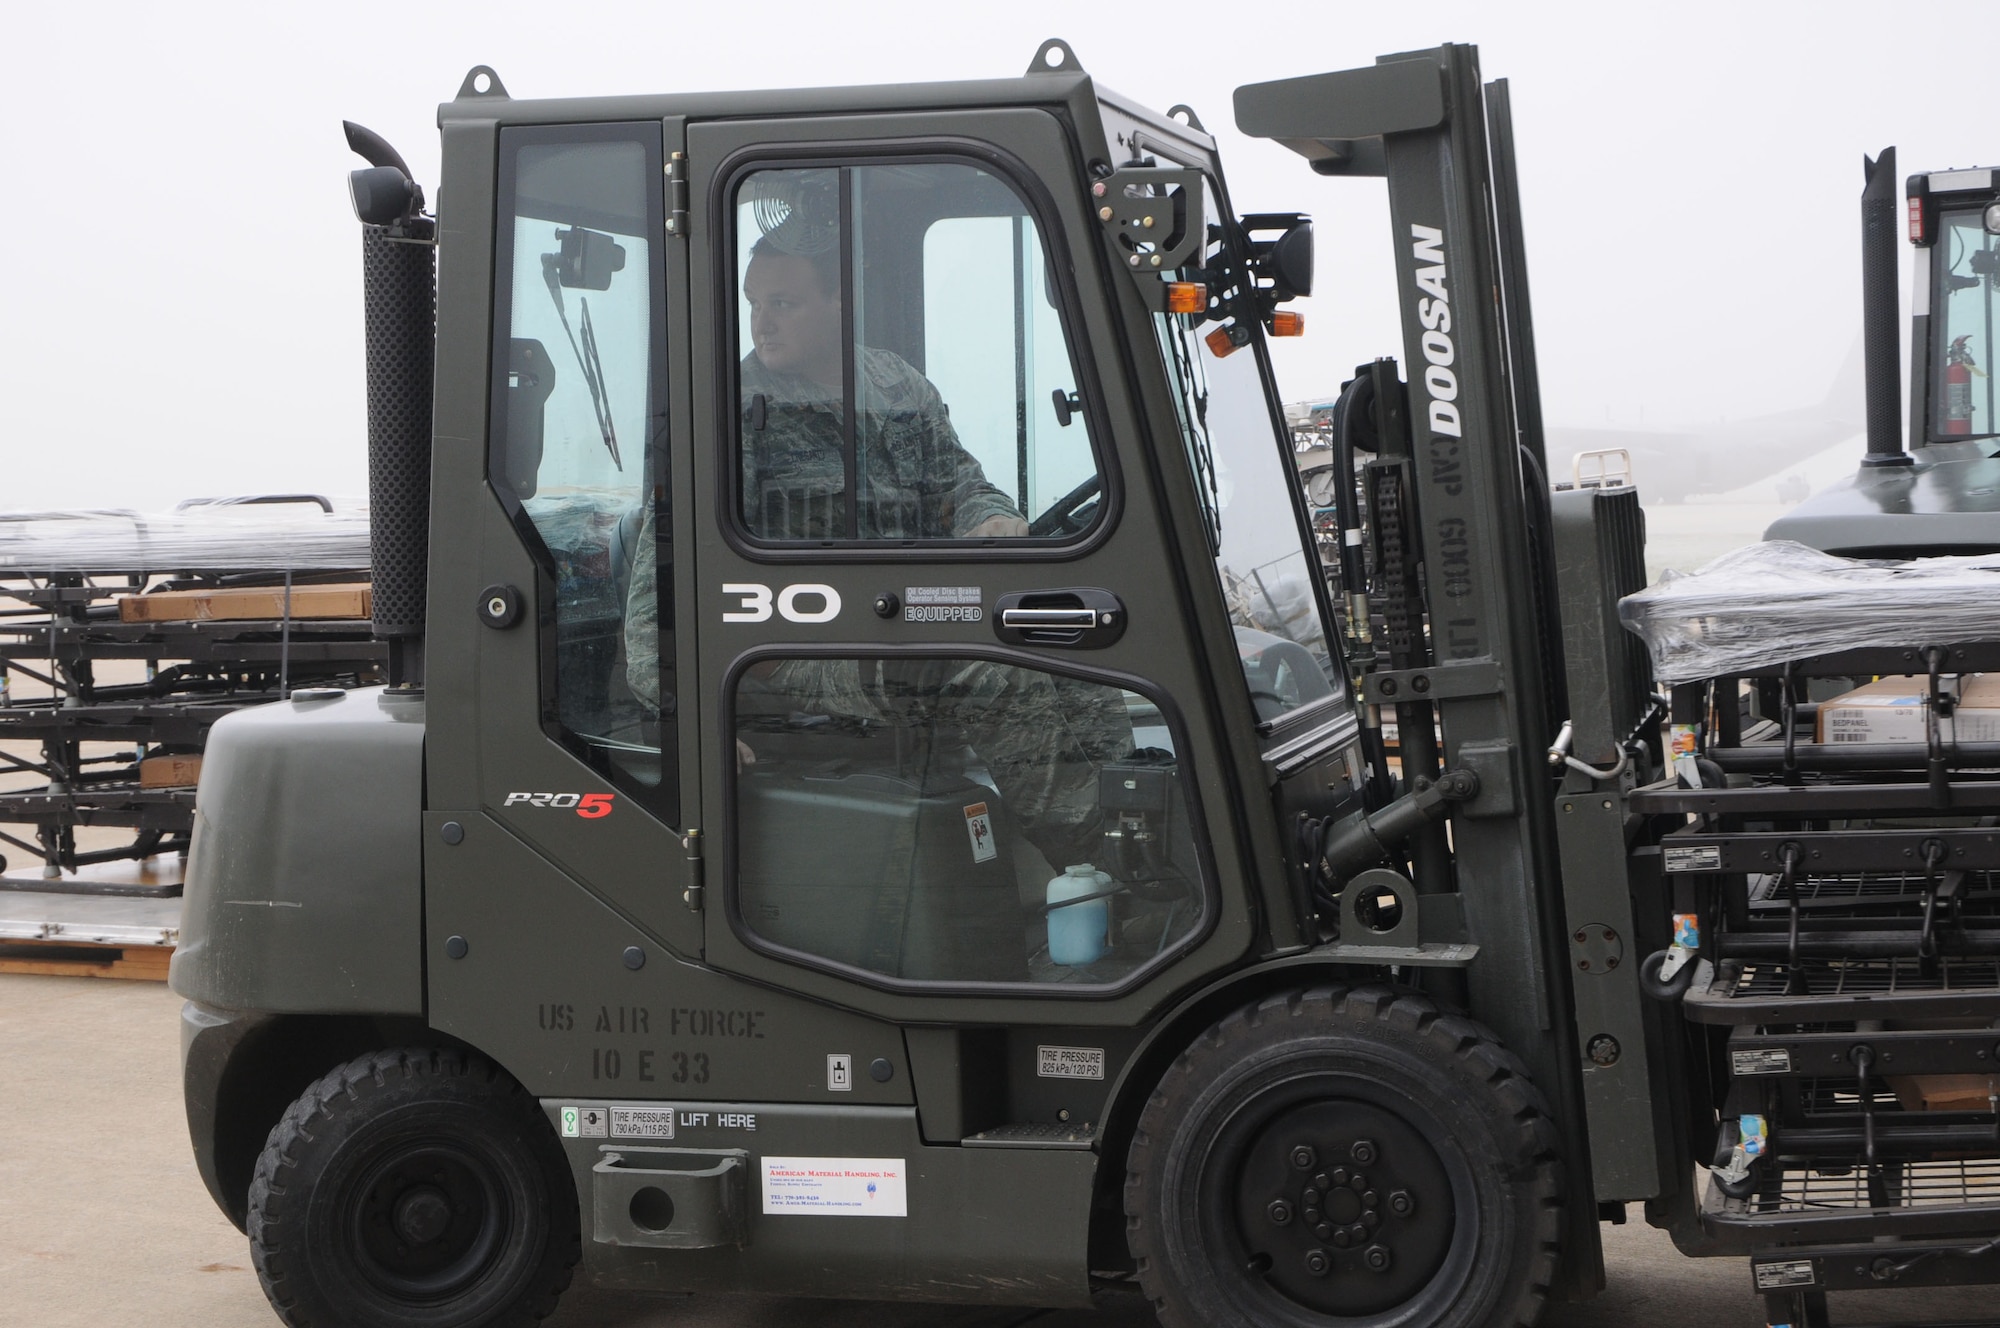 Tech. Sgt. Anthony Cresanto, an air transportation specialist assigned to the 76th Aerial Port Squadron, operates a forklift during a Denton Mission pallet build-up here, Dec. 5, 2015. The Denton program permits the Department of Defense to provide transportation of privately donated humanitarian assistance cargo to foreign countries using military transportation on a space-available basis. The cargo Cresanto is working on is bound for Honduras.  (U. S. Air Force photo/ Tech. Sgt. Rick Lisum)